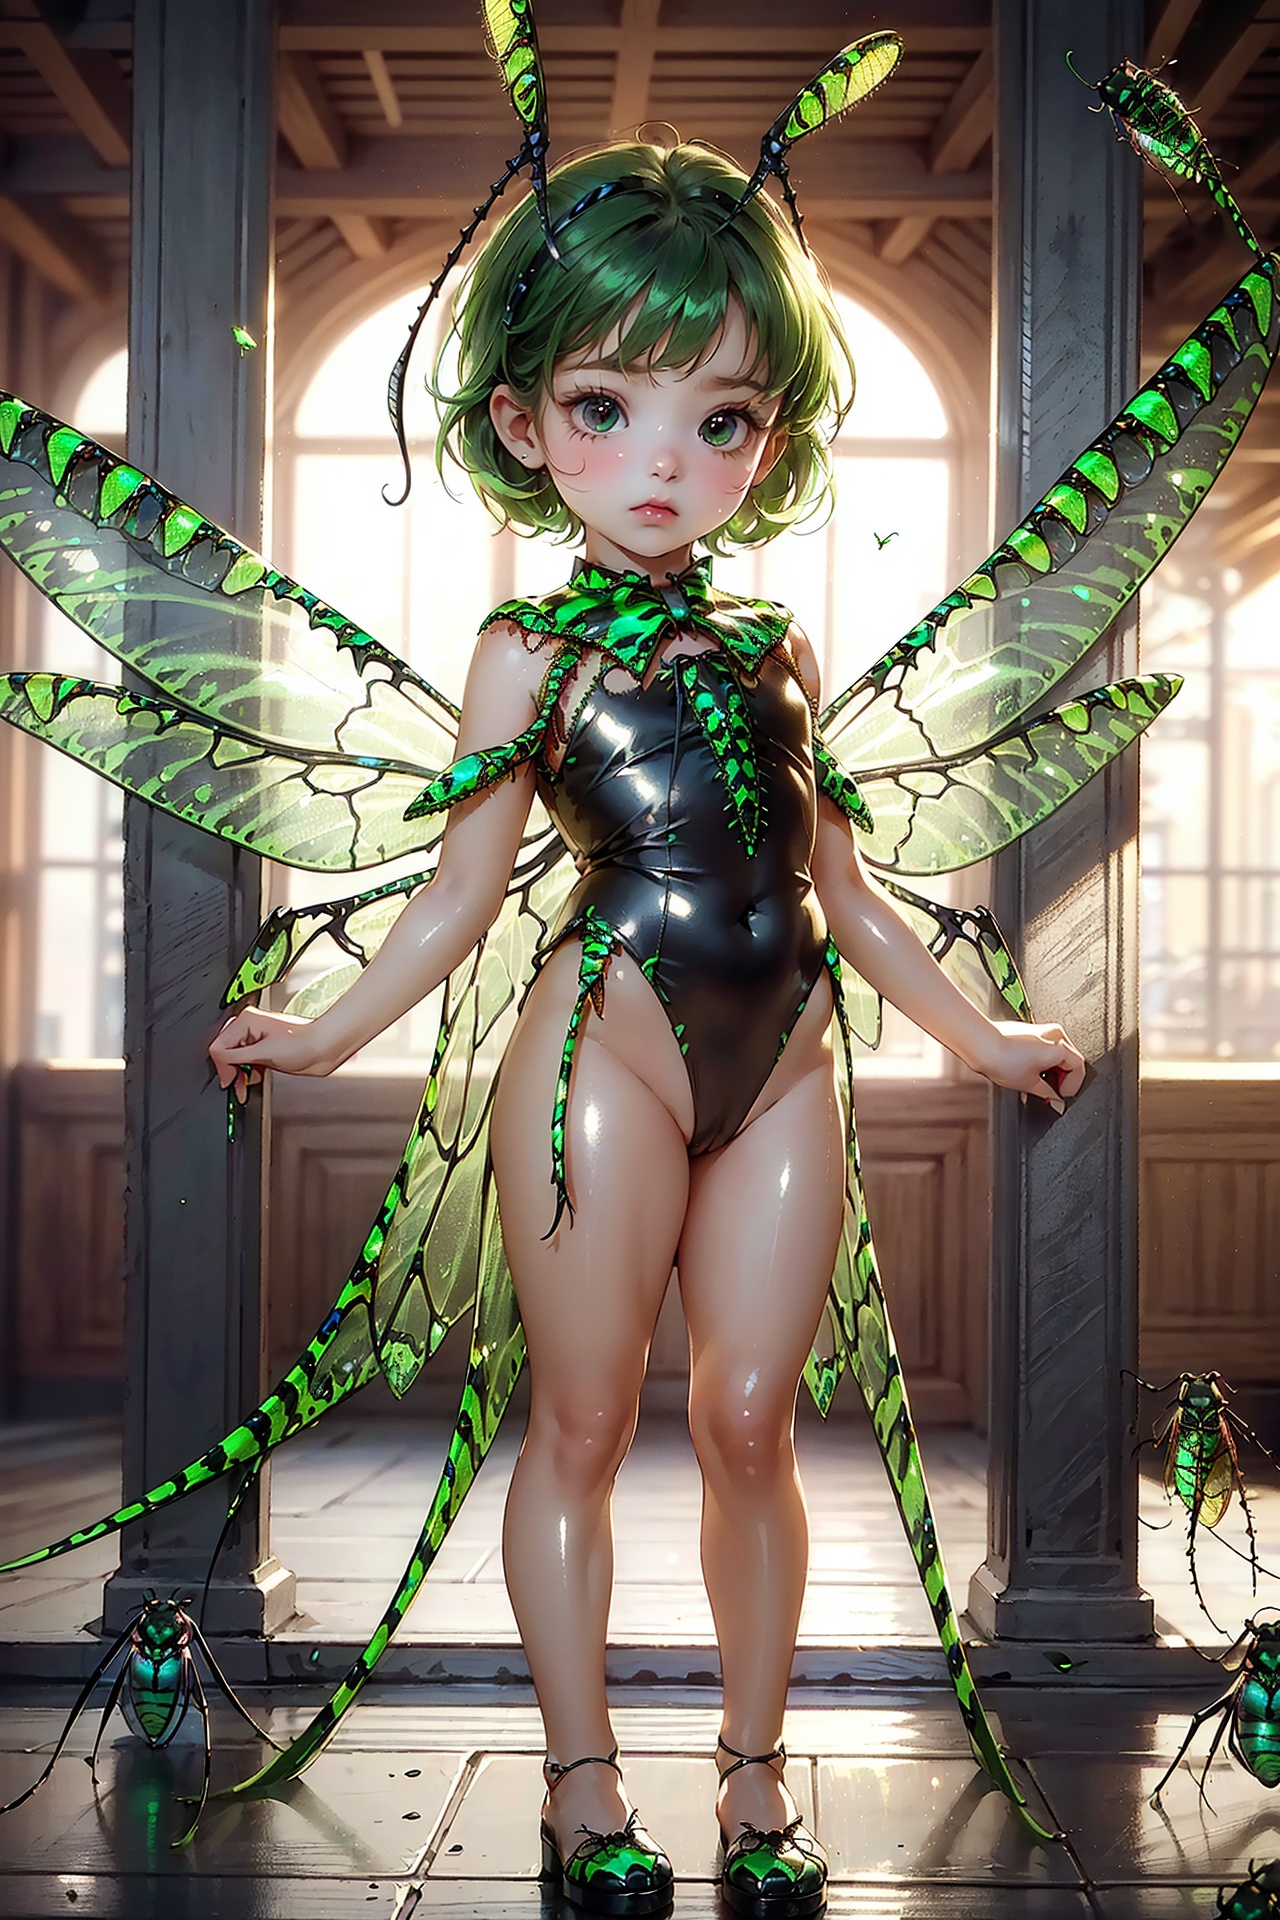  Masterpiece, best quality, (shiny_skin:1.5), (children:1.8), (solo:1.8), shiny_hair, *****, small breasts, green hair, (locust wings:1.5), locust antennae, a mysterious and powerful locust costume, featuring a green and gold color palette, adorned with locust patterns and sheer trailing fabric